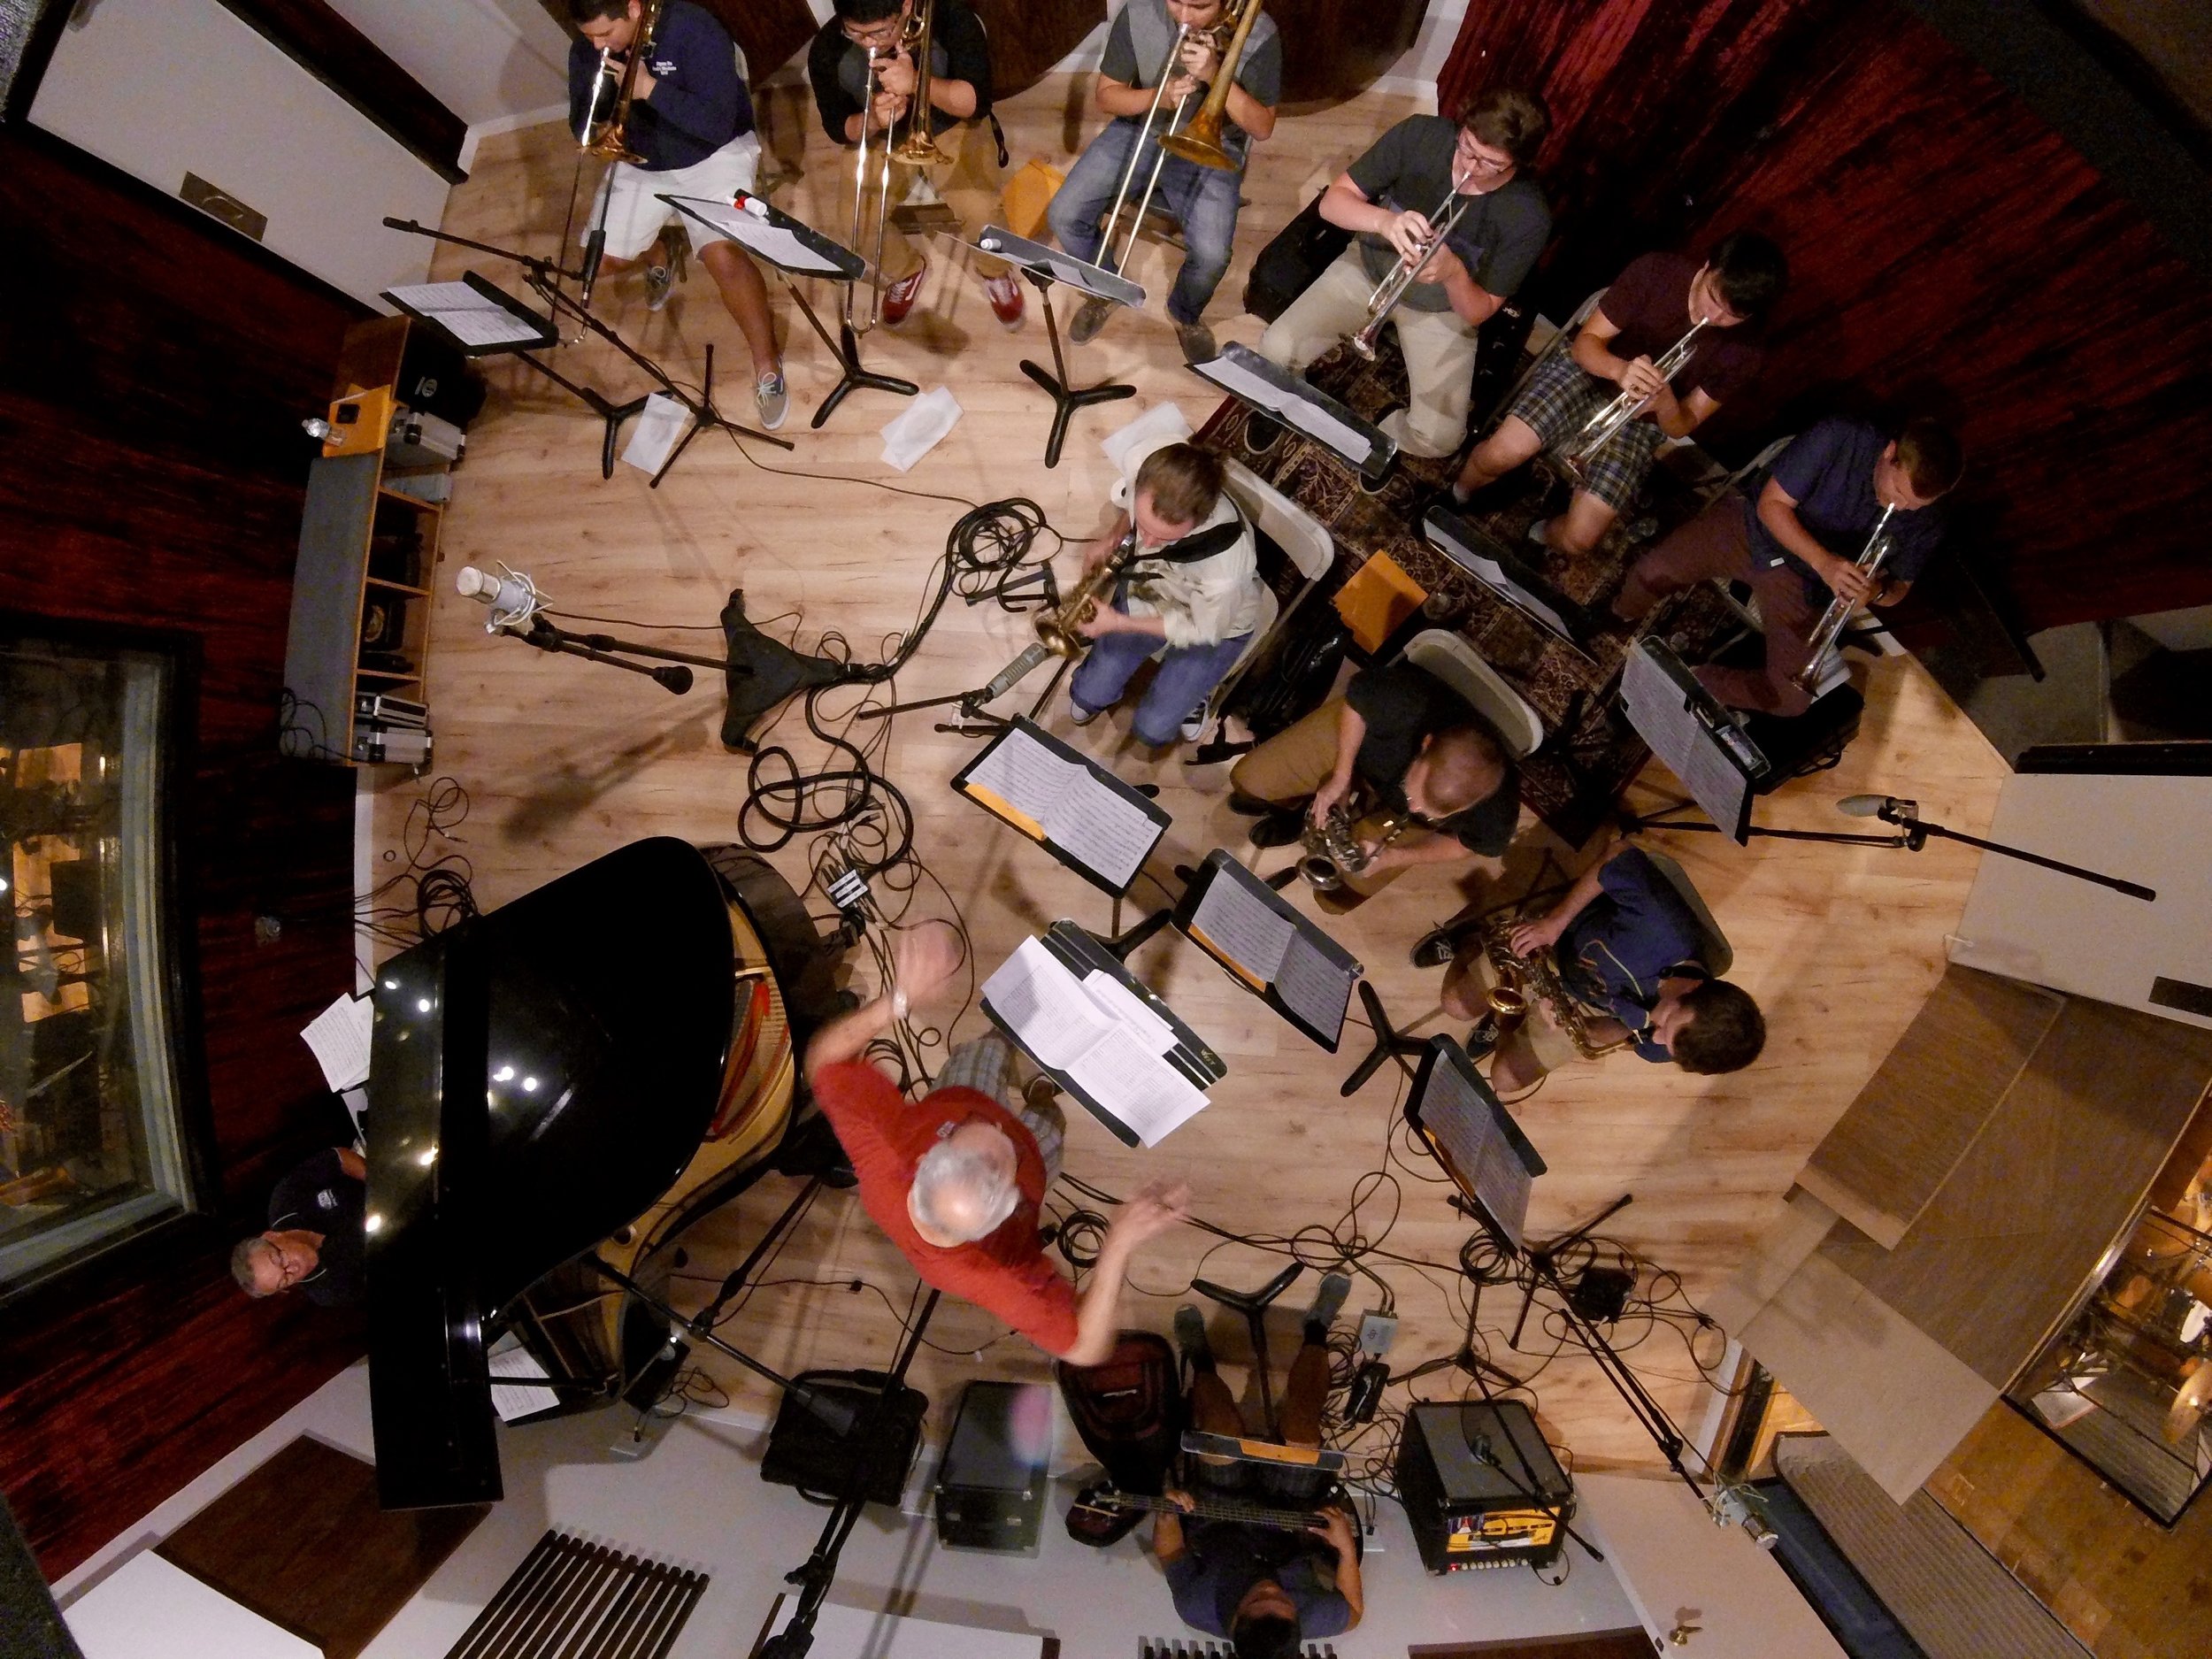 Honeytaps Big Band Recording Session (Photo by Chris Schlarb)